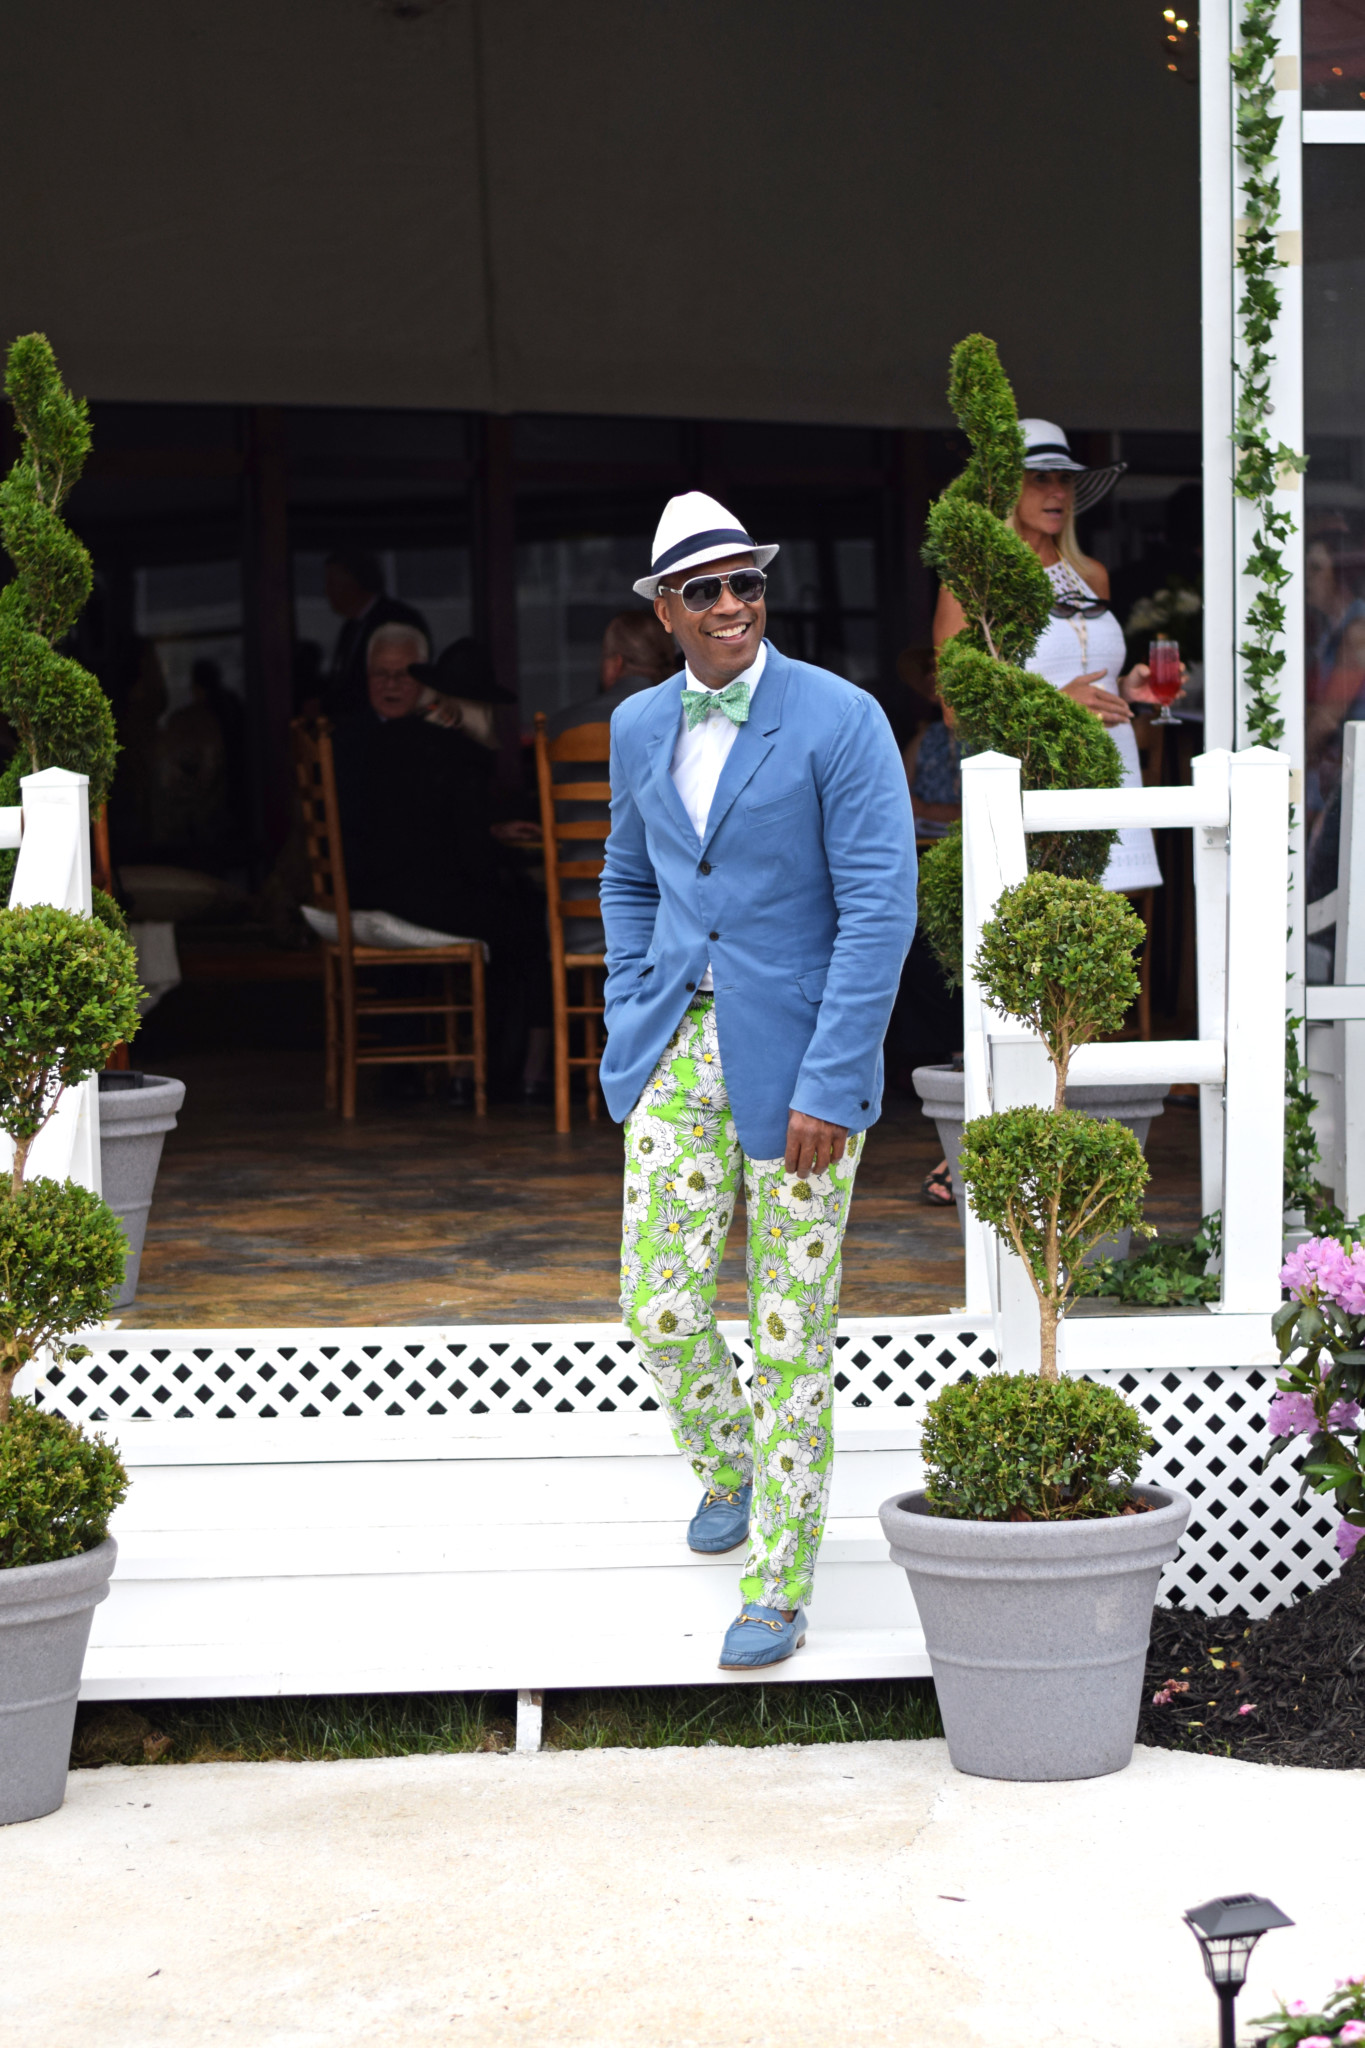 Making a statement at the Preakness - The DCFashion Fool